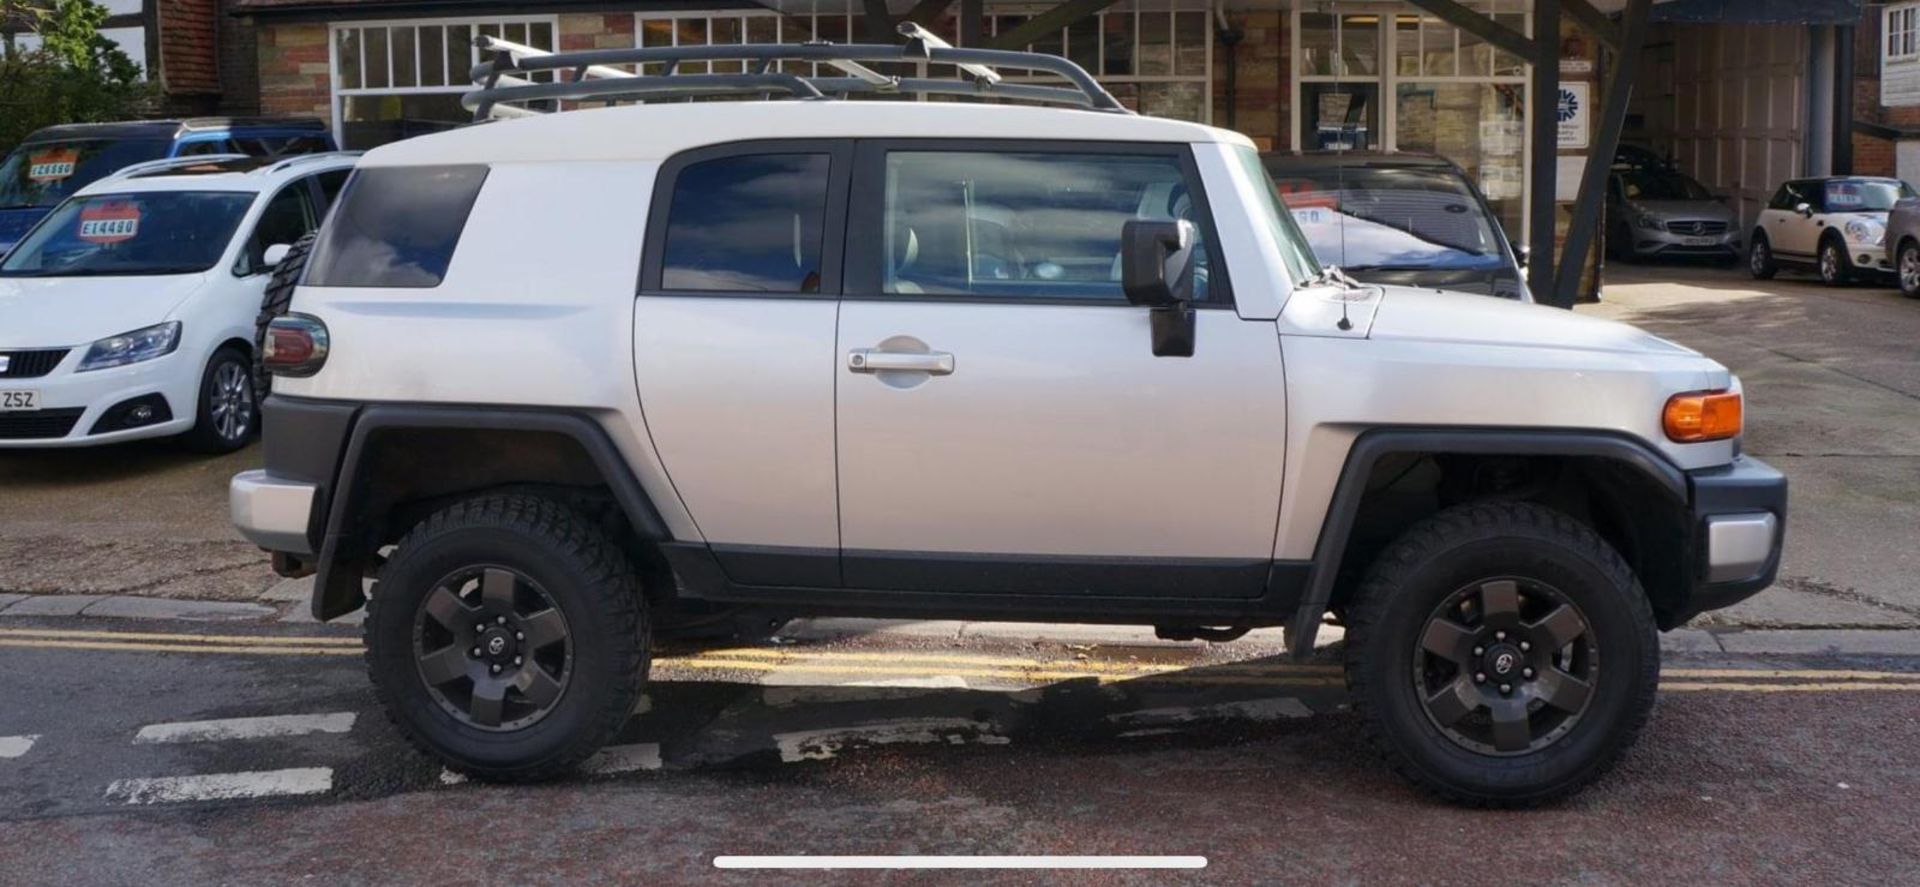 2007 57 reg - Such a rare car - The stunning Toyota FJ Cruiser 4.0 V6 Automatic 4x4, LEFT HAND DRIVE - Image 6 of 6